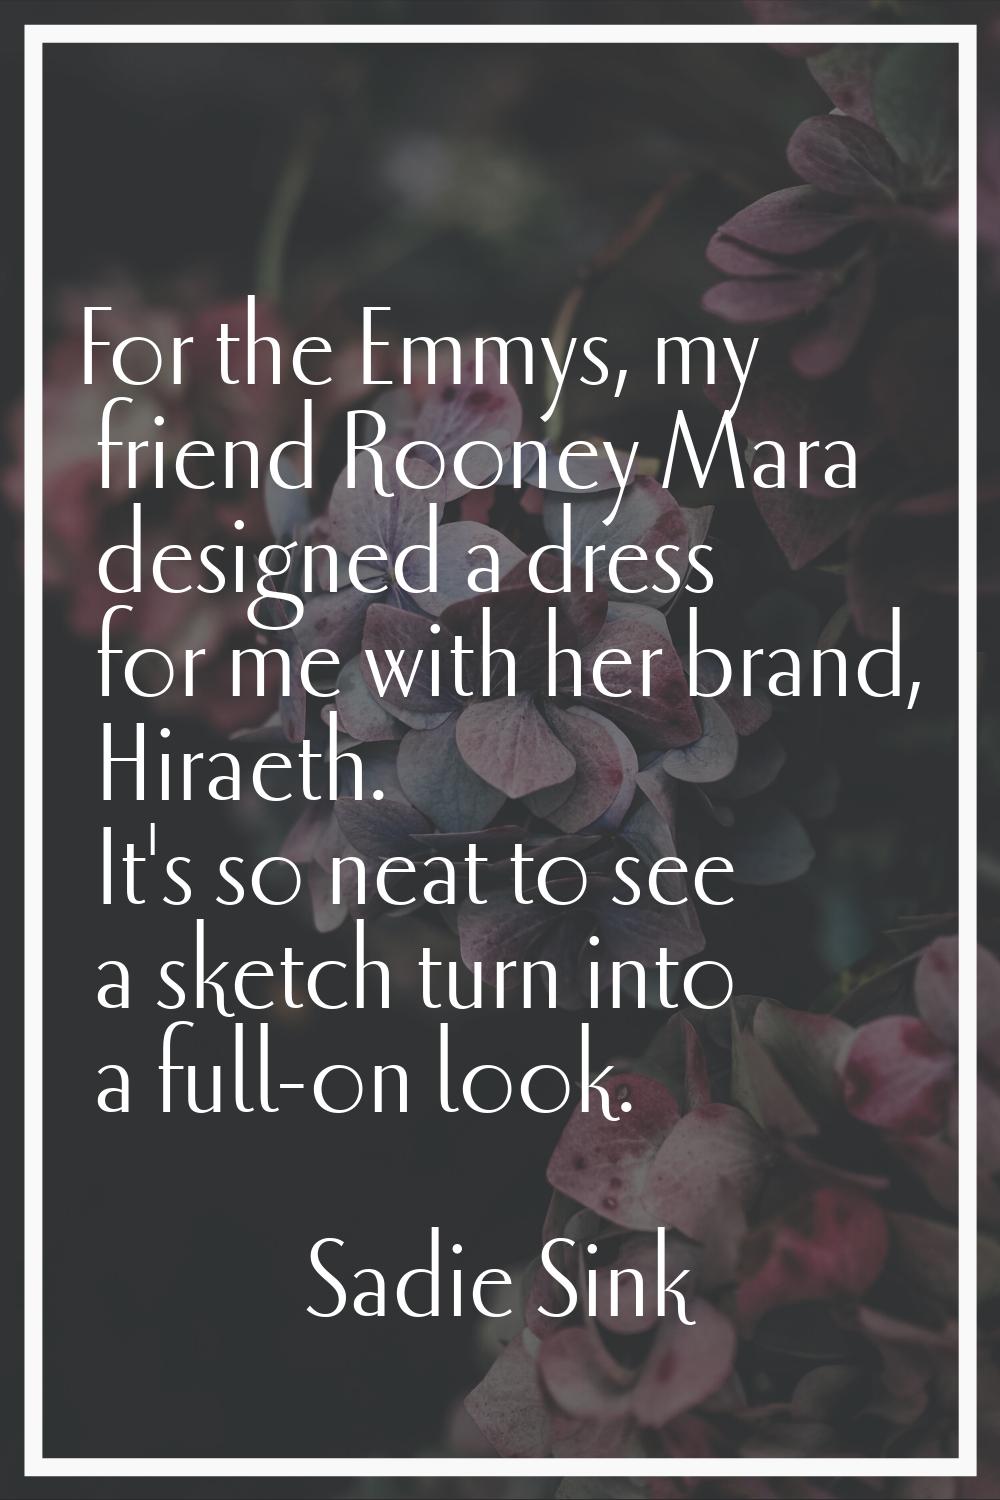 For the Emmys, my friend Rooney Mara designed a dress for me with her brand, Hiraeth. It's so neat 